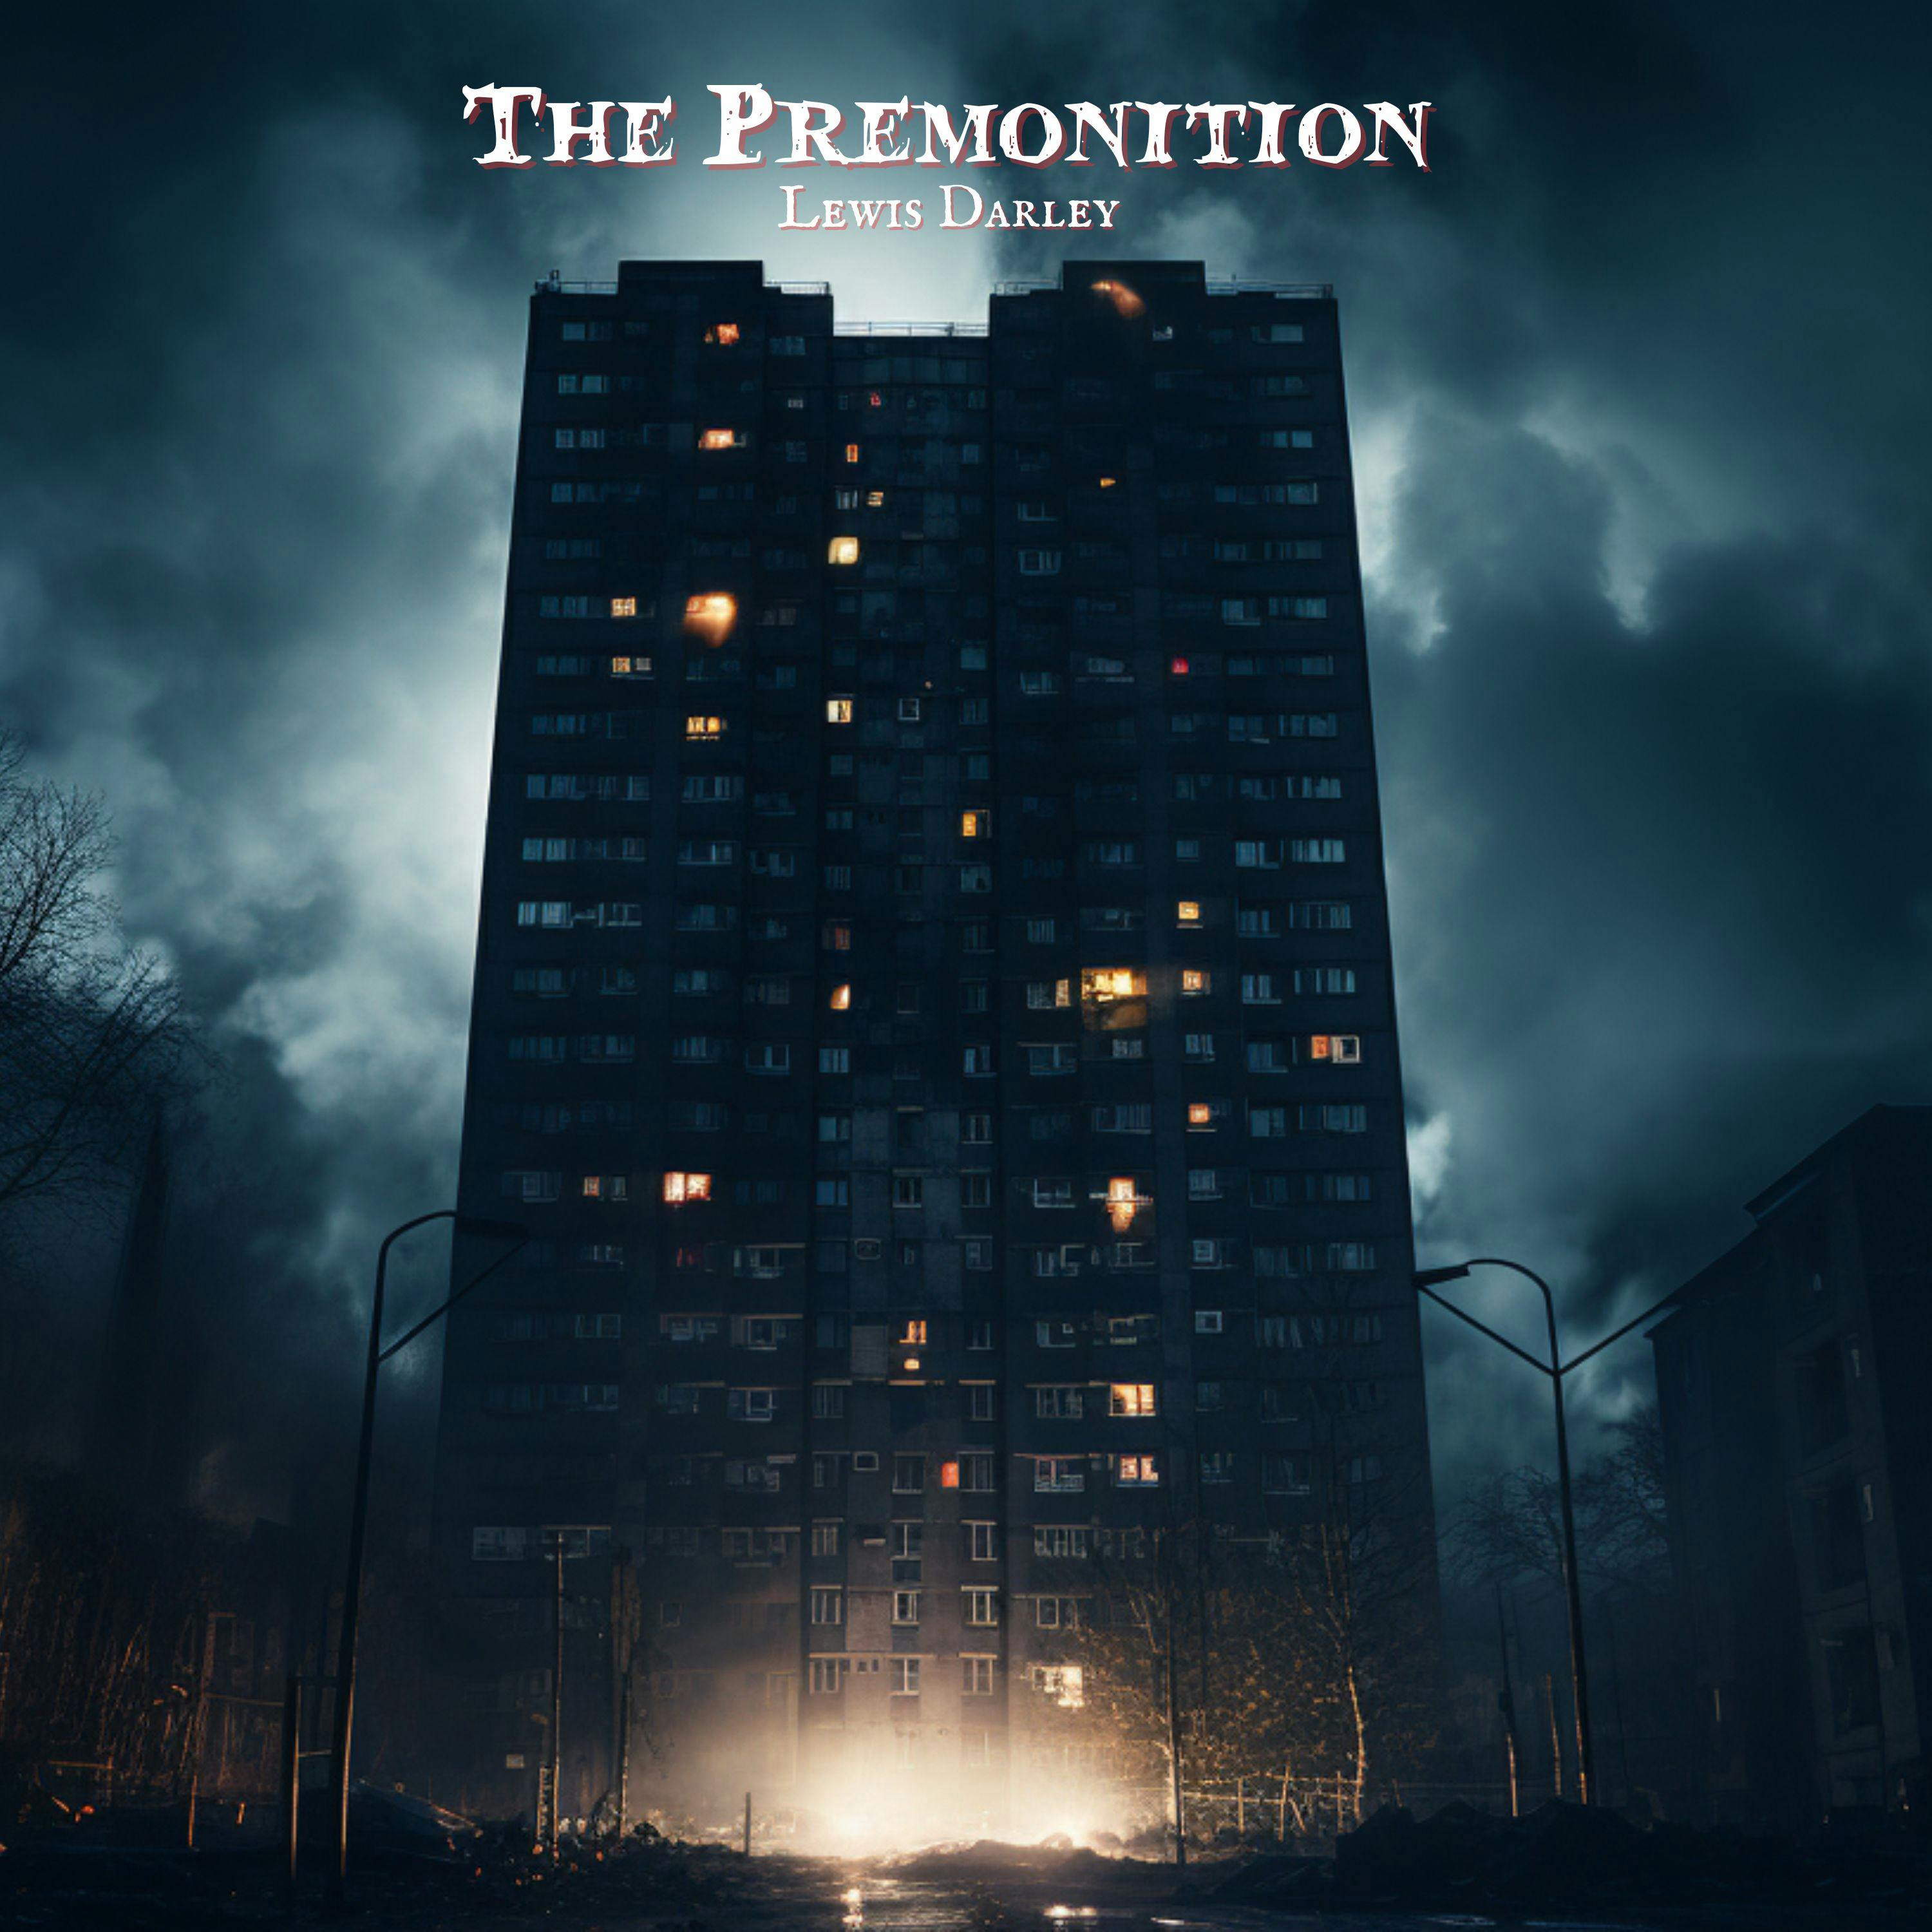 The Premonition by Lewis Darley